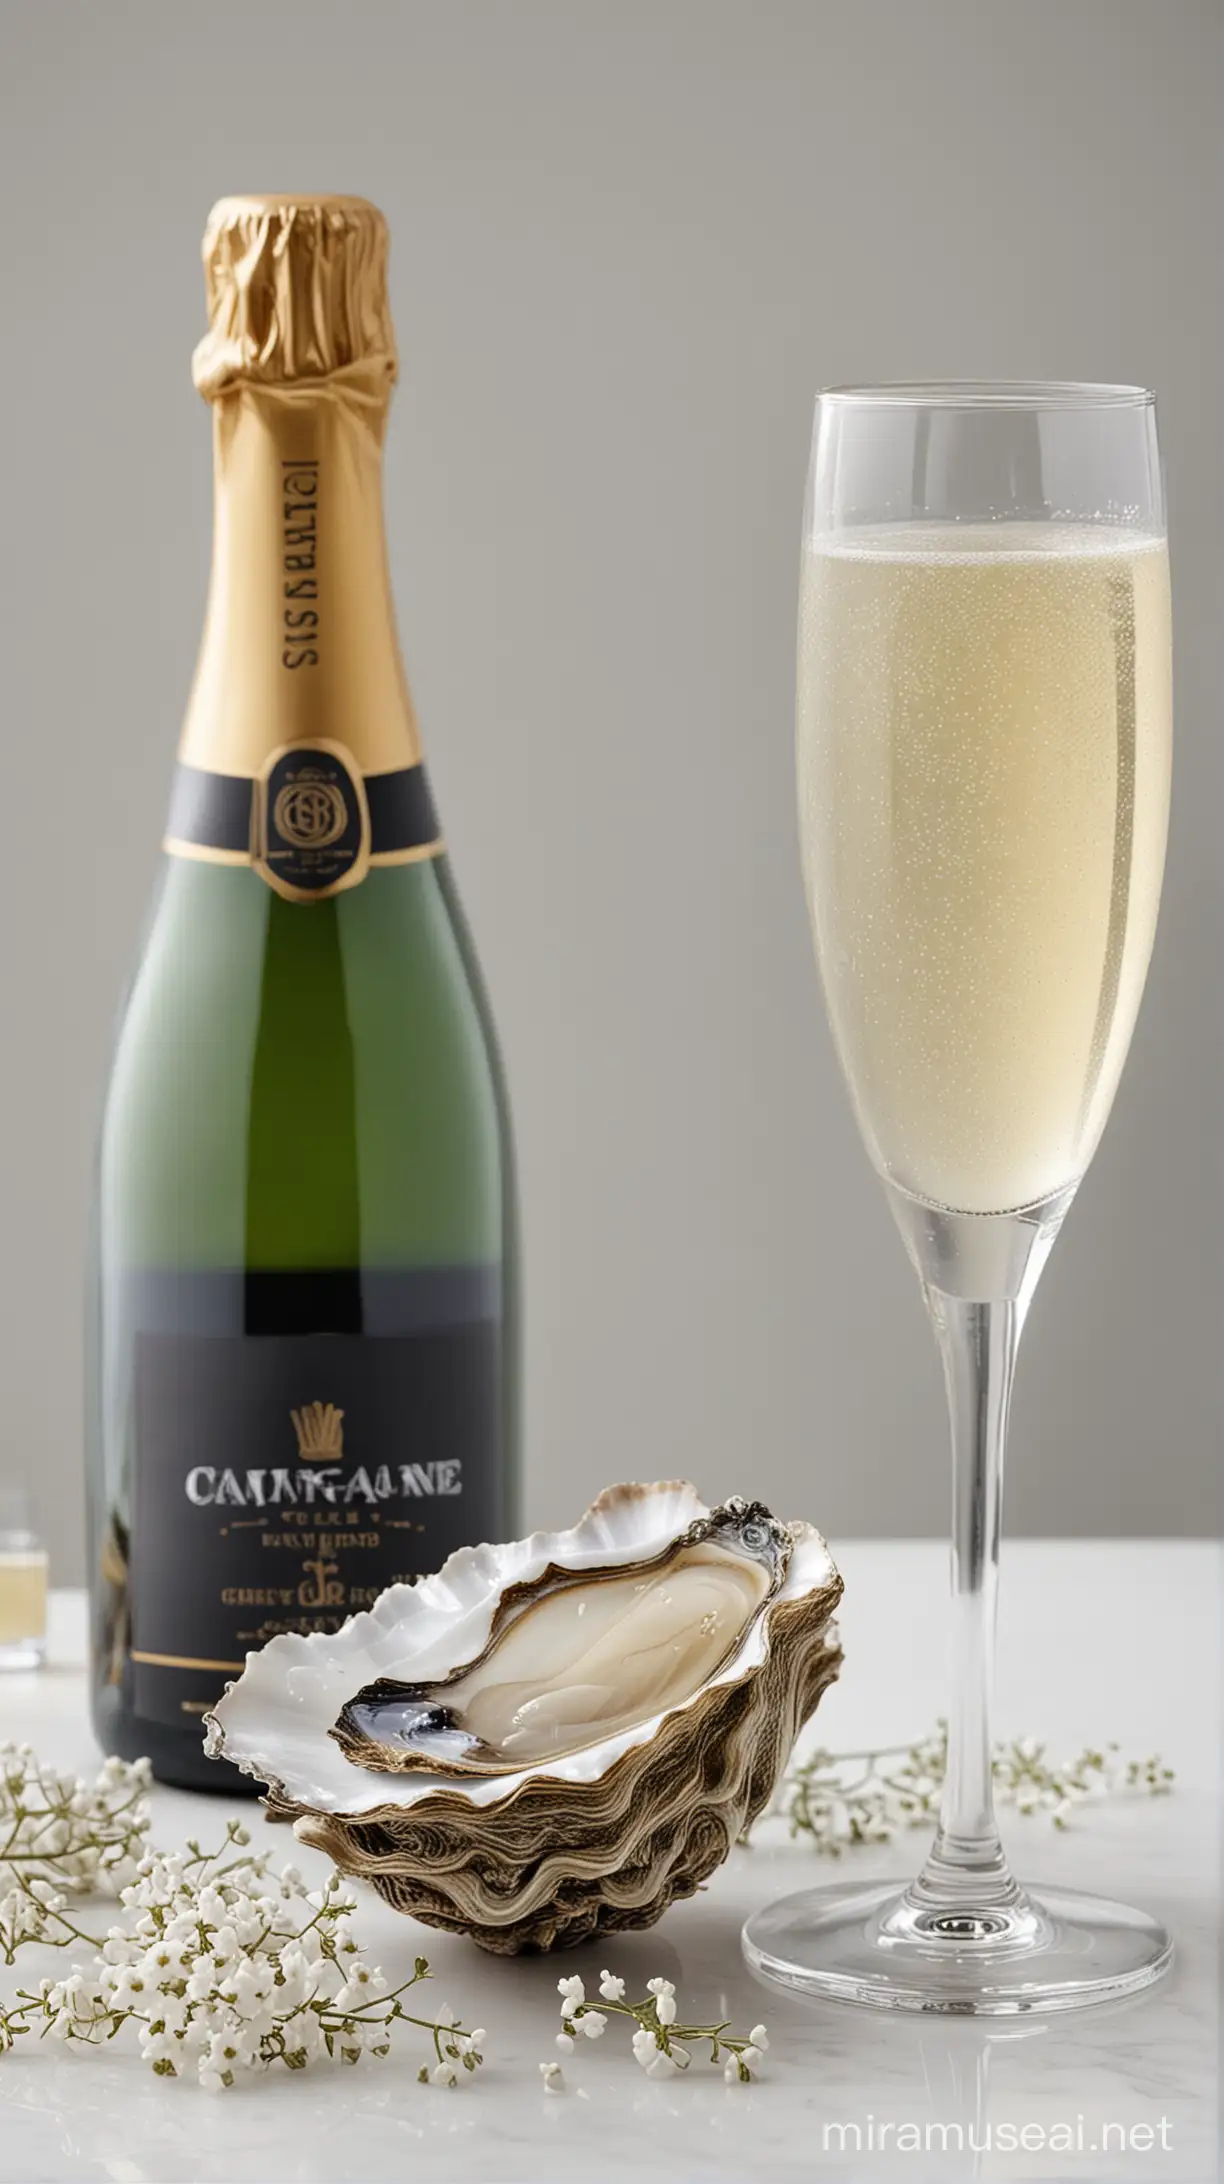 Display an oyster and add some baby's breath to this image and a glass of champagne with a white background